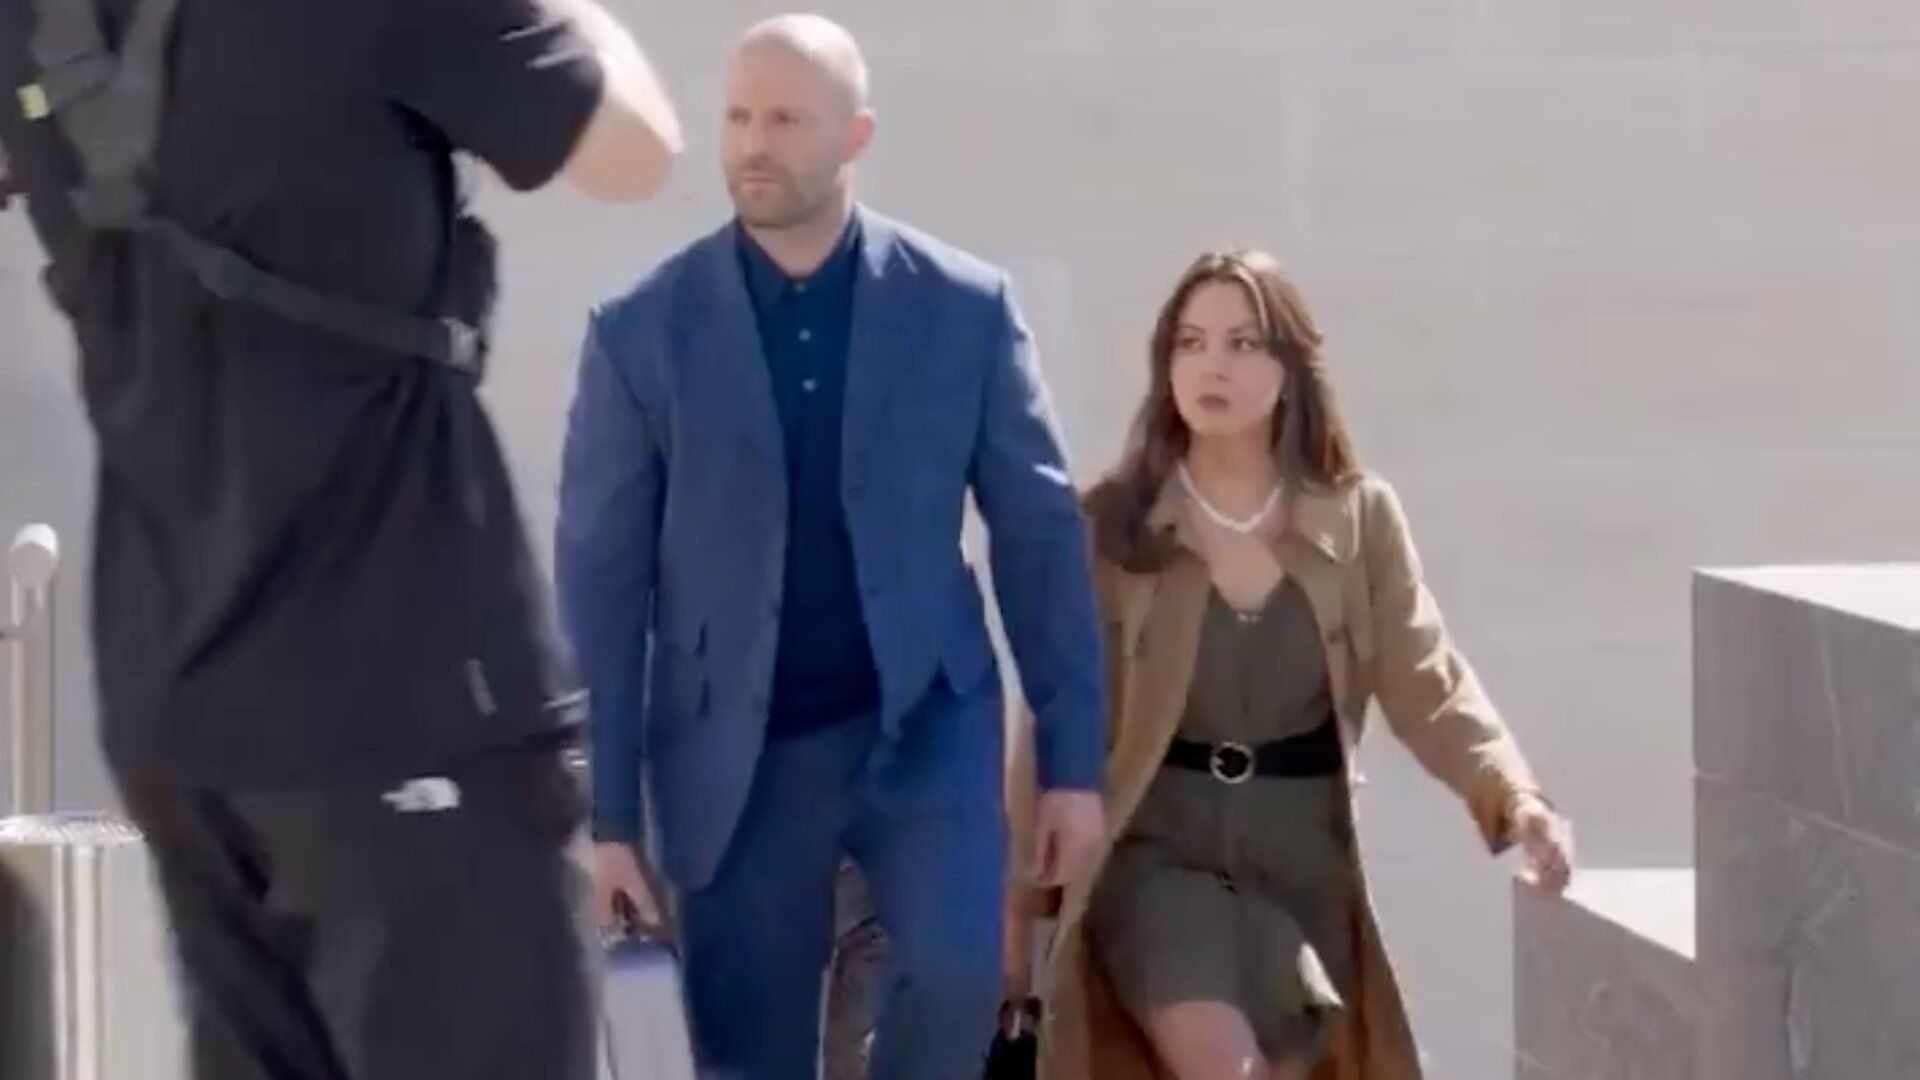 Guy Ritchie Shares Video From The Set of FIVE EYES Featuring Jason Statham and Aubrey Plaza